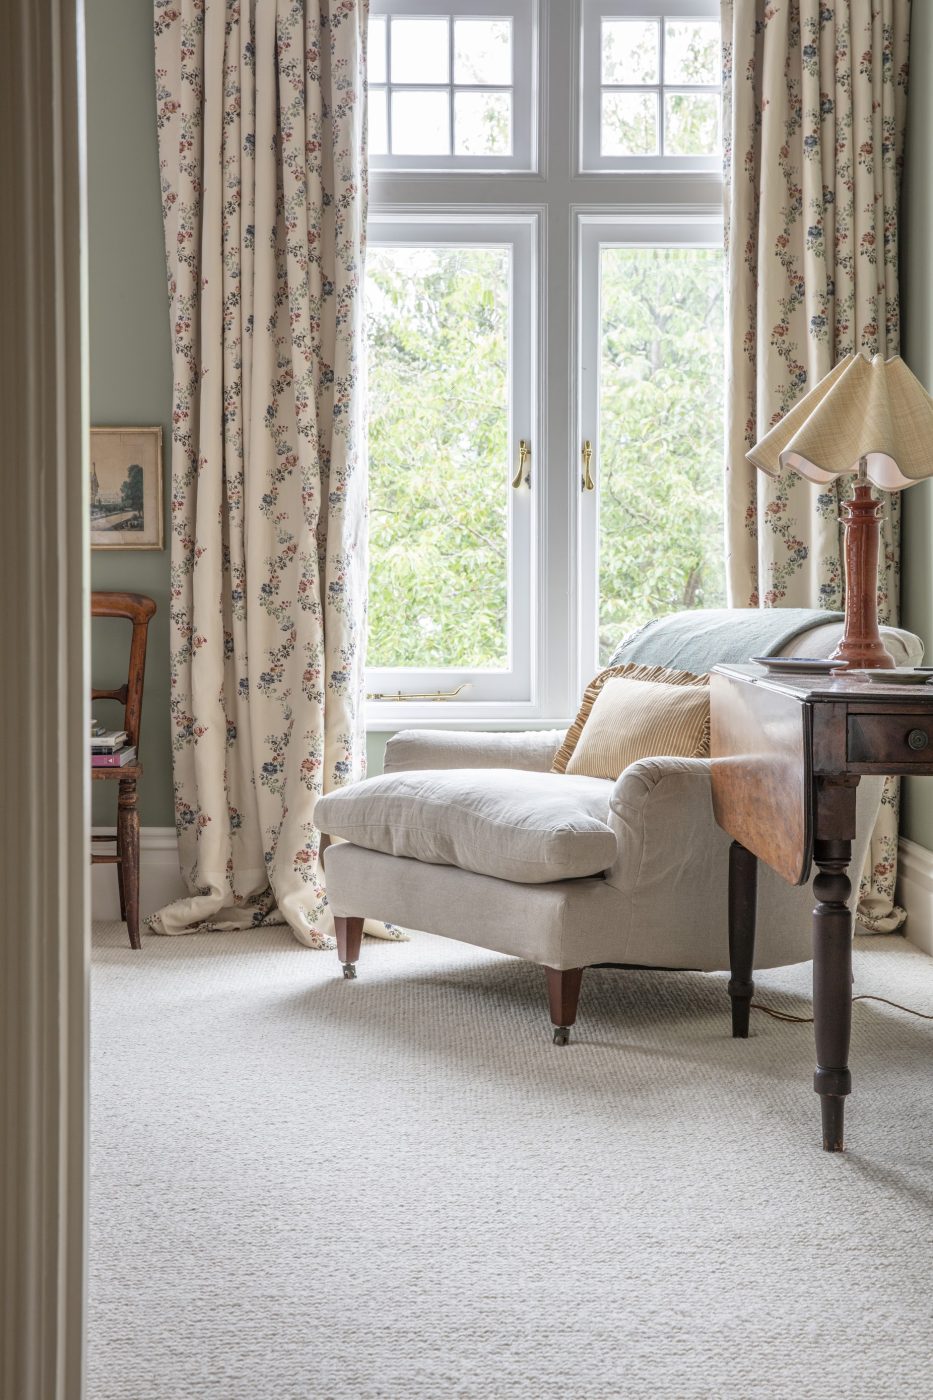 A large chair covered in natural-colored fabric in the main bedroom of Louise Roe's London home